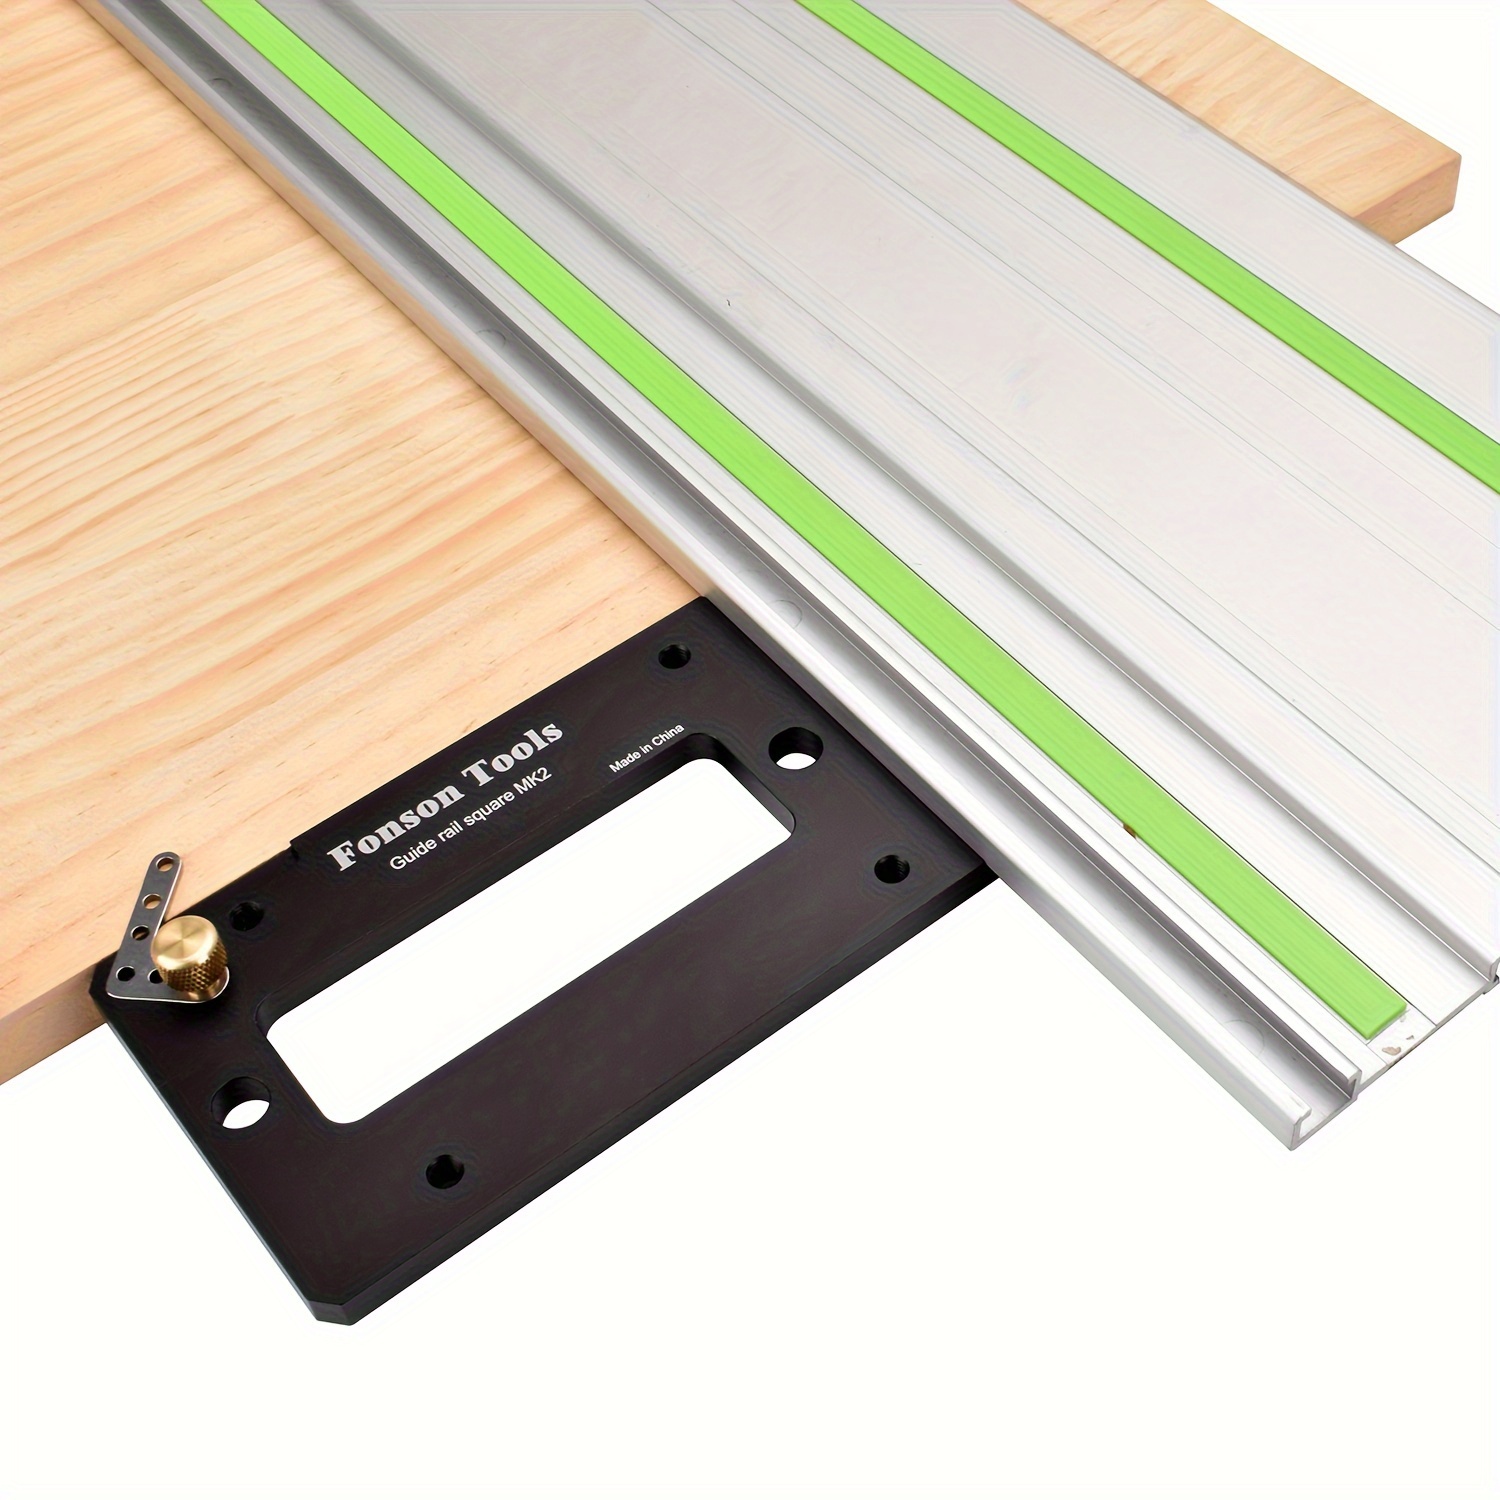 

1pc Aluminum Alloy Track Saw Square Guide Rail Square, Woodworking 90 Degree Right Angle Guide Plate Square, Cutting Everytime For Festool